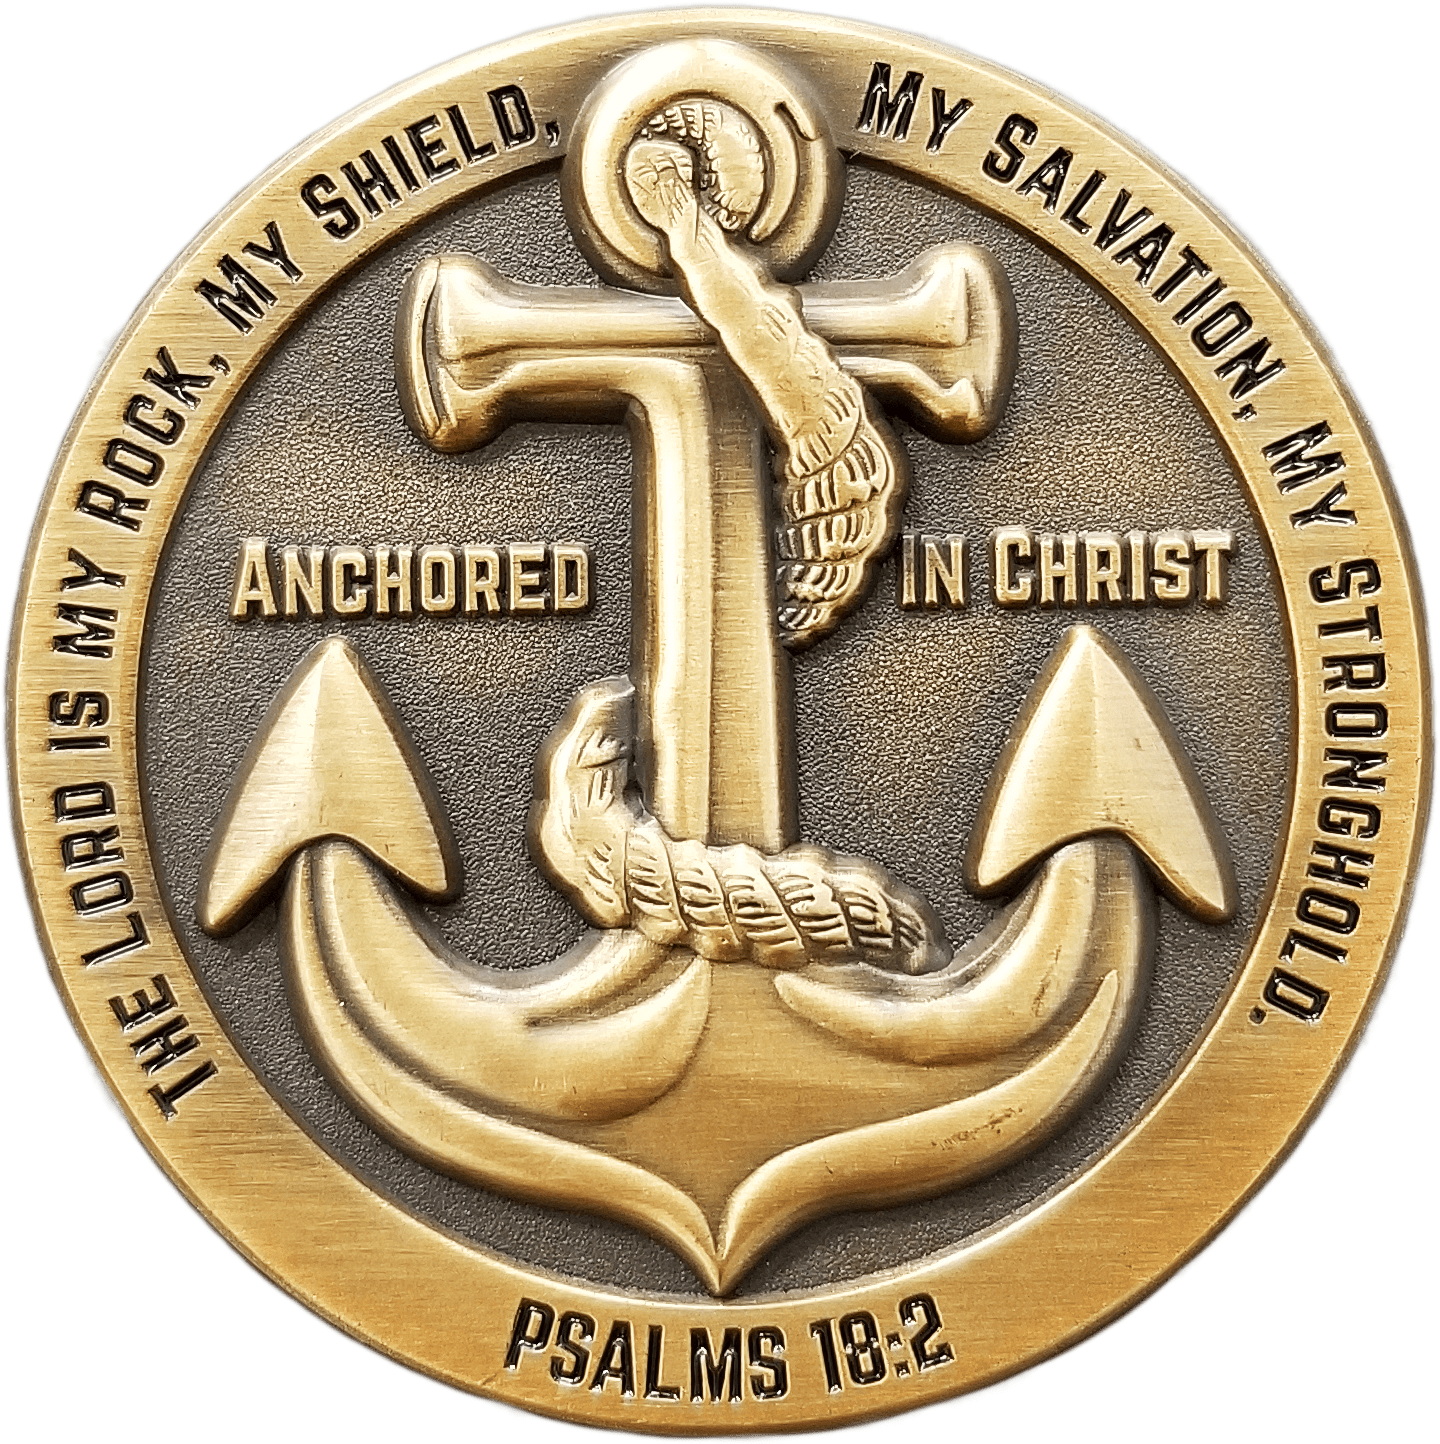 Front: Anchor with text, "Anchored in Christ" / "The Lord is my rock, my shield, my salvation, my stronghold." / "Psalms 18:2"